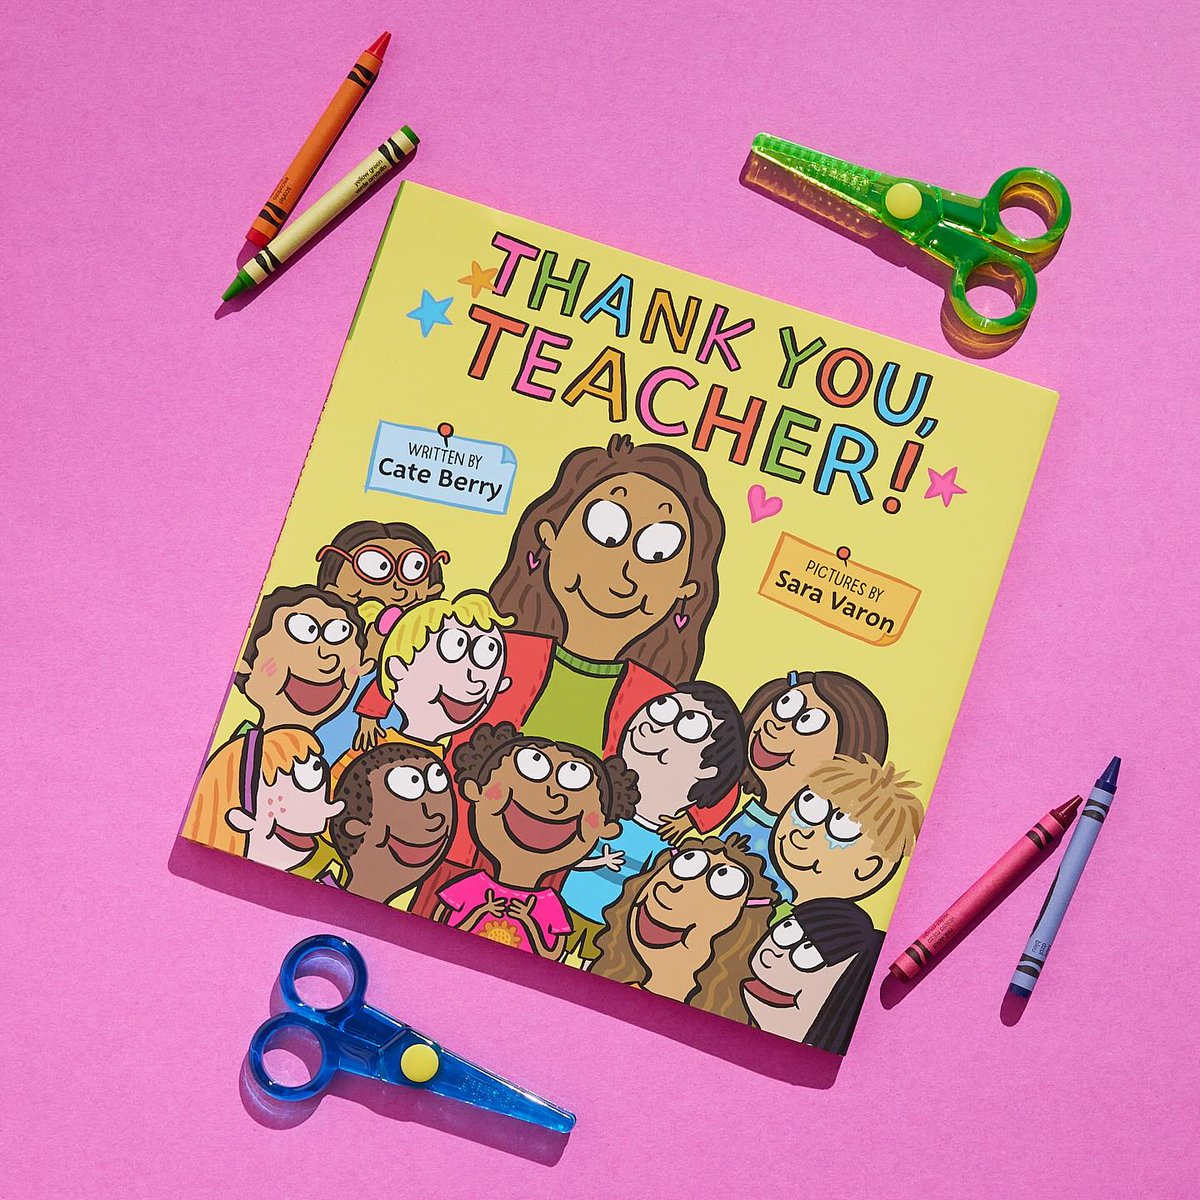 THANK YOU, TEACHERS! You are heroes inside and outside the classroom, shaping brighter futures daily. We celebrate you each and every day! 📚❤️ #TeacherAppreciationWeek @HarperChildrens